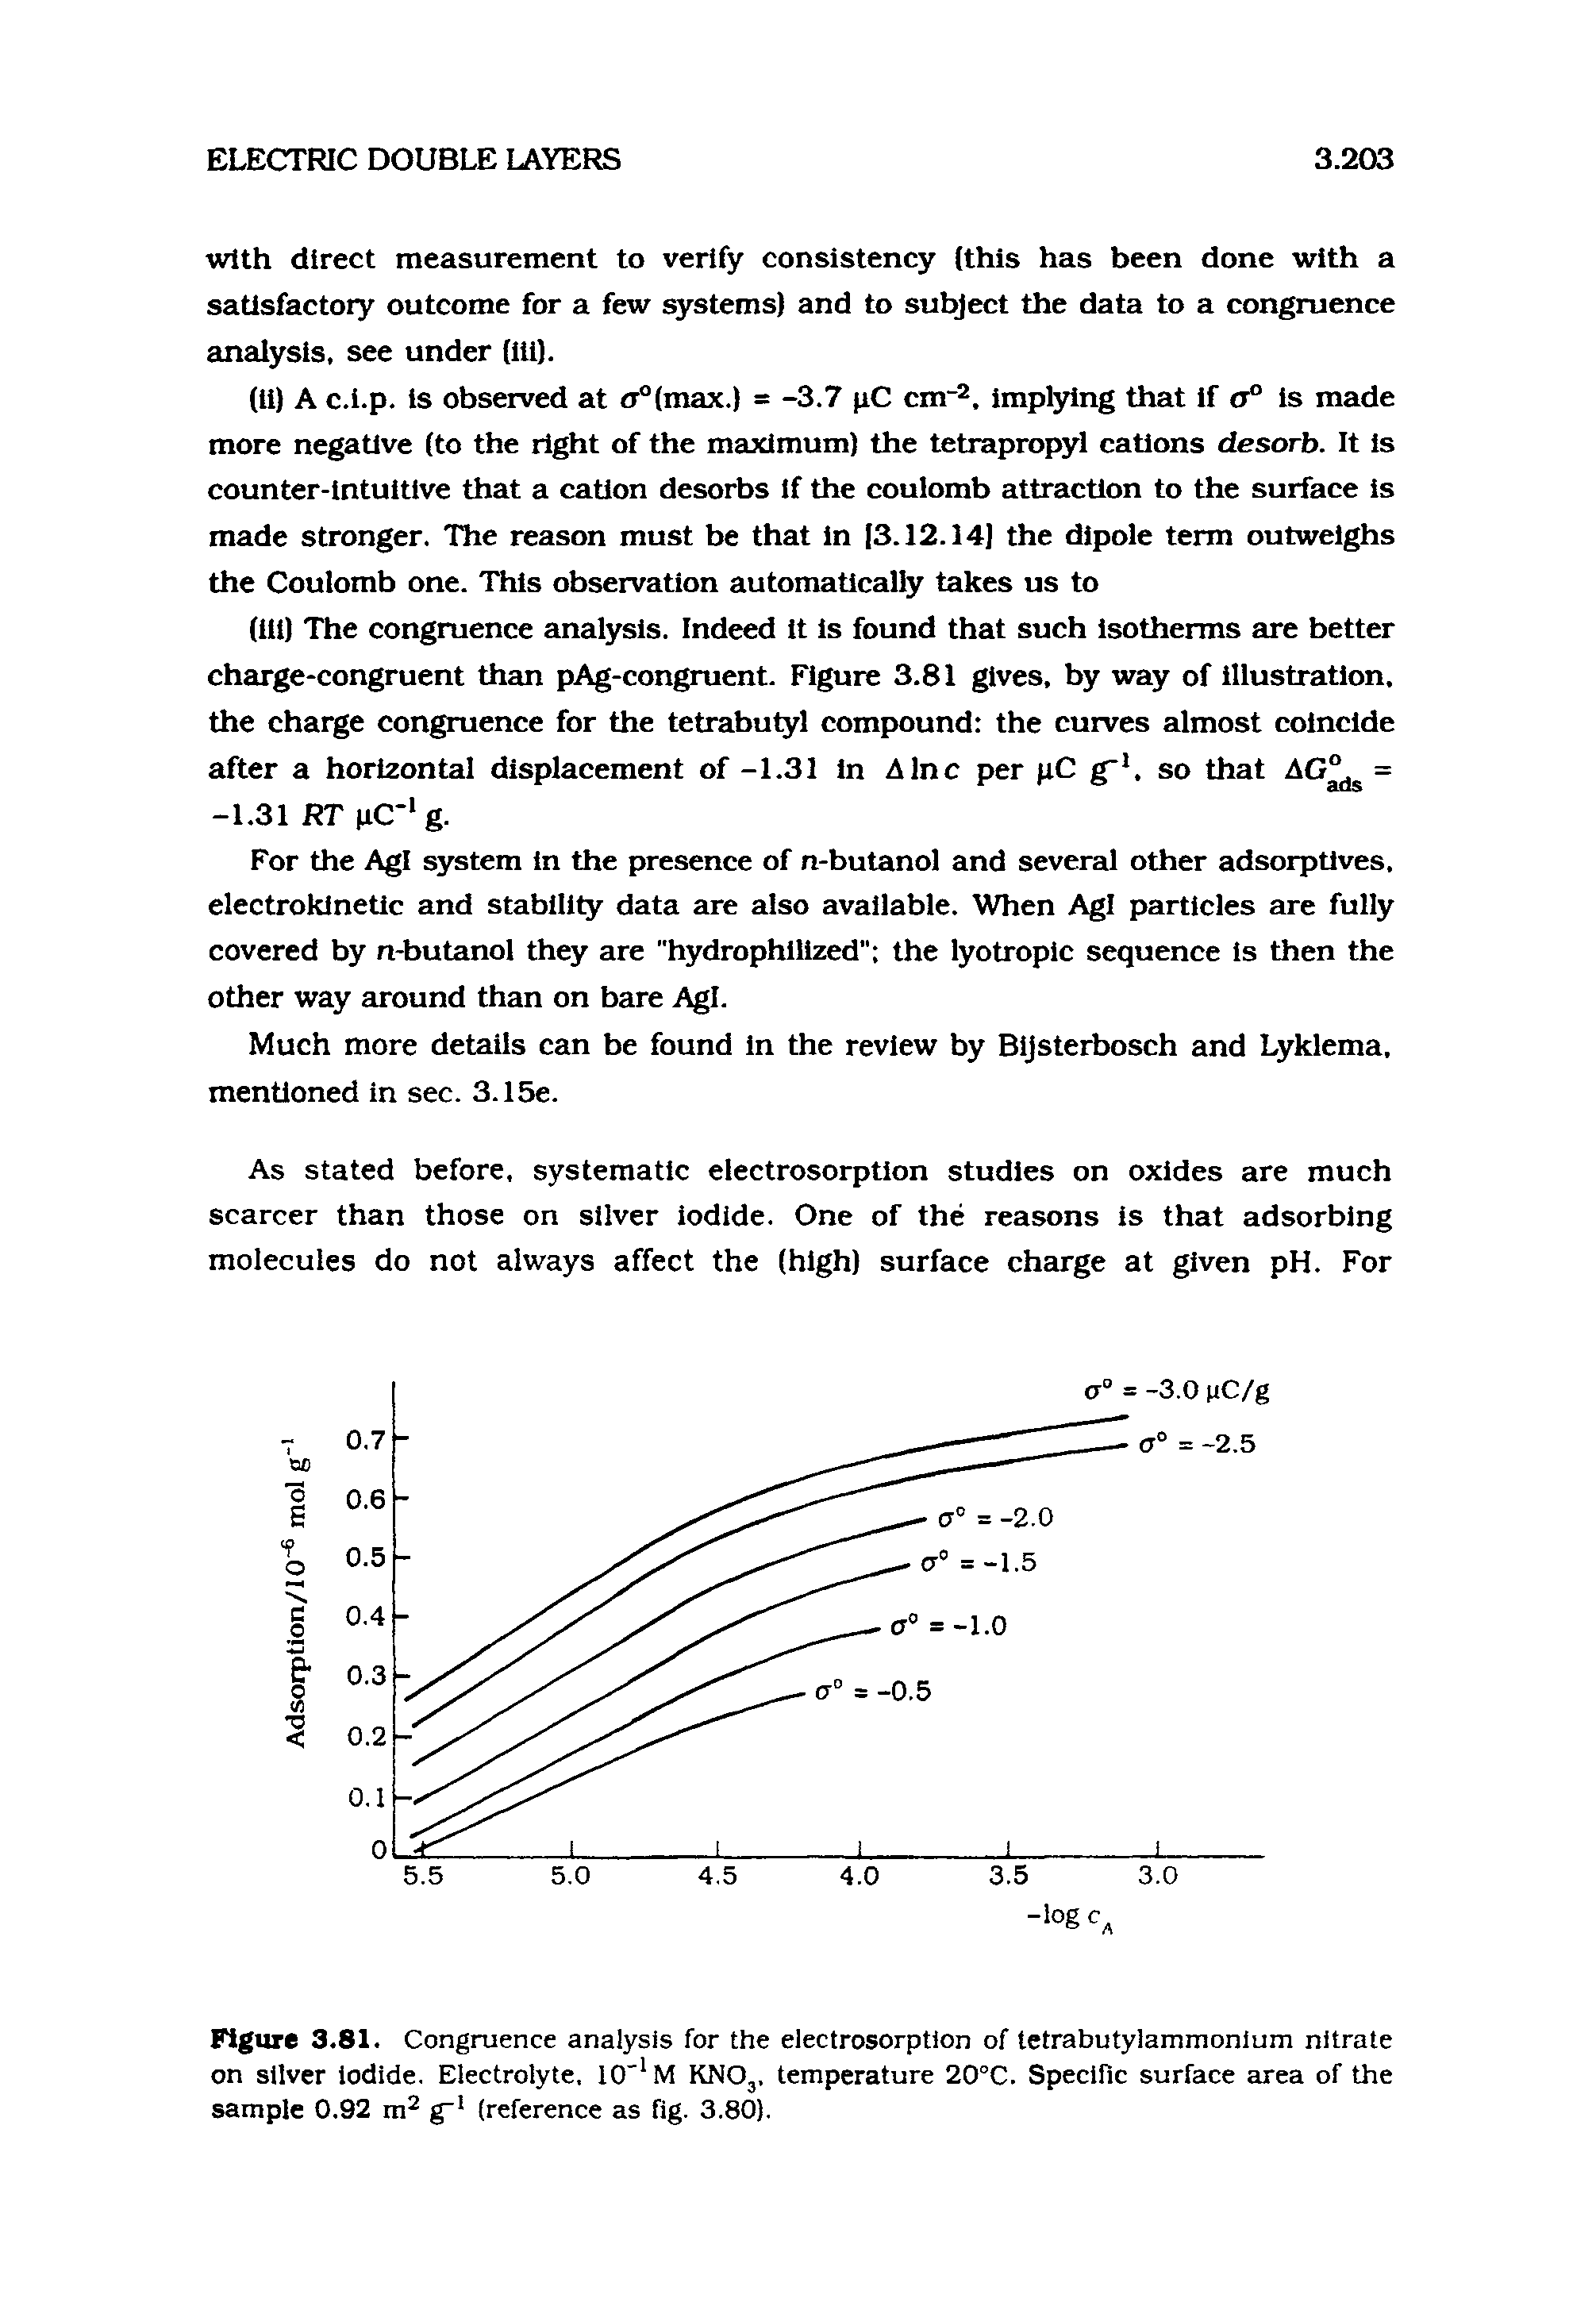 Figure 3.81. Congruence analysis for the electrosorption of tetrabutylammonlum nitrate on silver iodide. Electrolyte, 10" M KNO,. temperature 20°C. Specific surface area of the sample 0.92 m g" (reference as fig. 3.80).